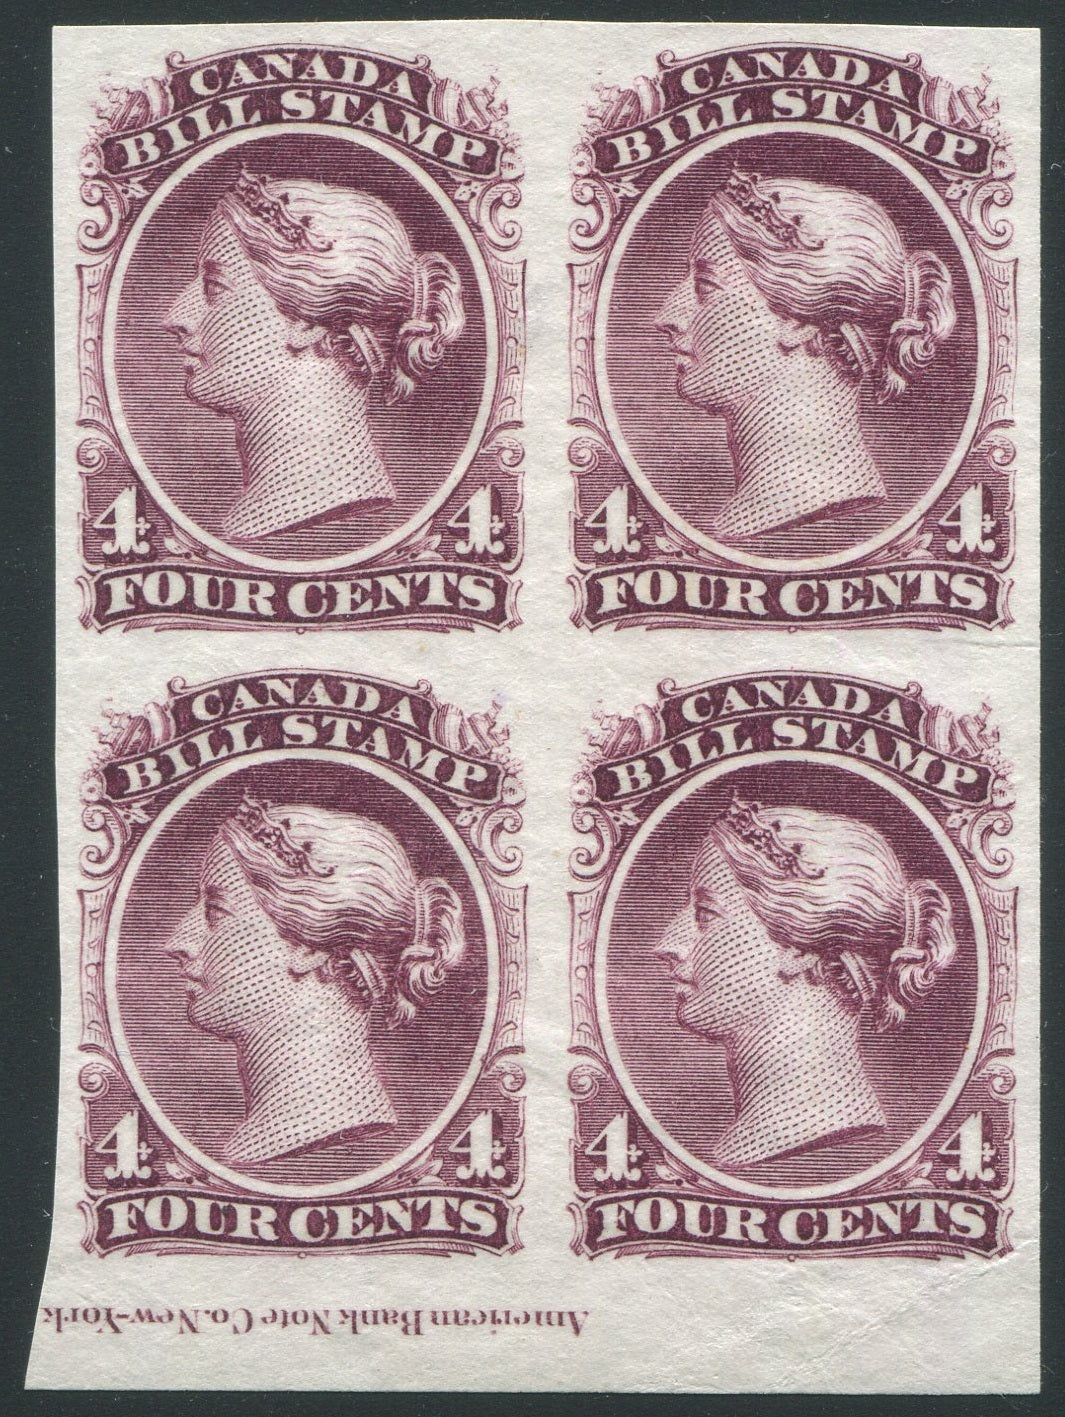 0021FB1910 - FB21 - Trial Colour Plate Proof Block of 4